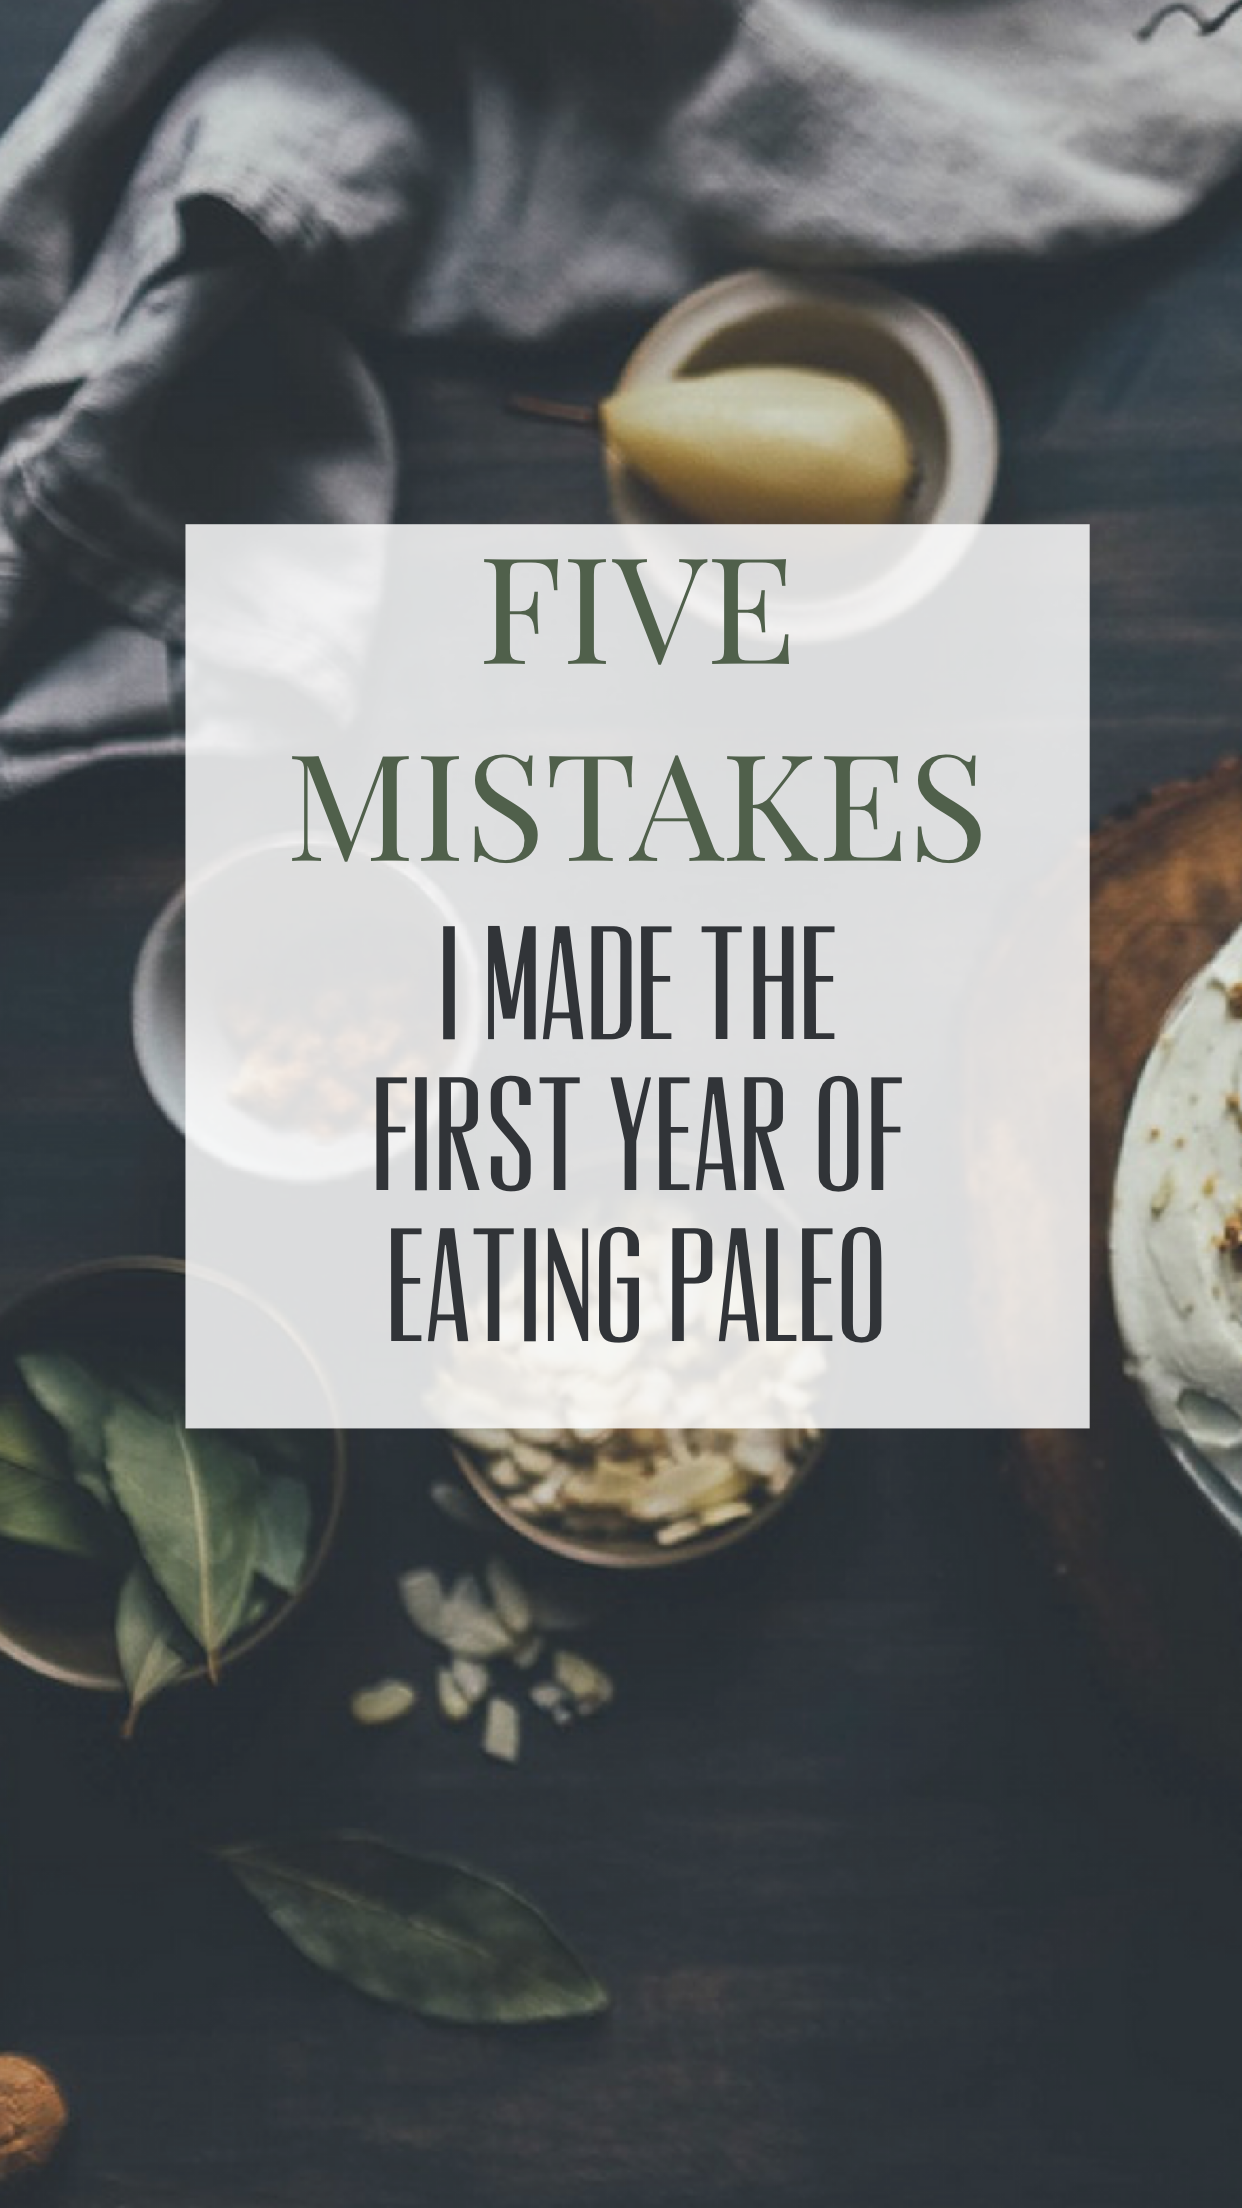 5 Mistakes I Made the First Year of Eating Paleo & How You Can Avoid Making Them